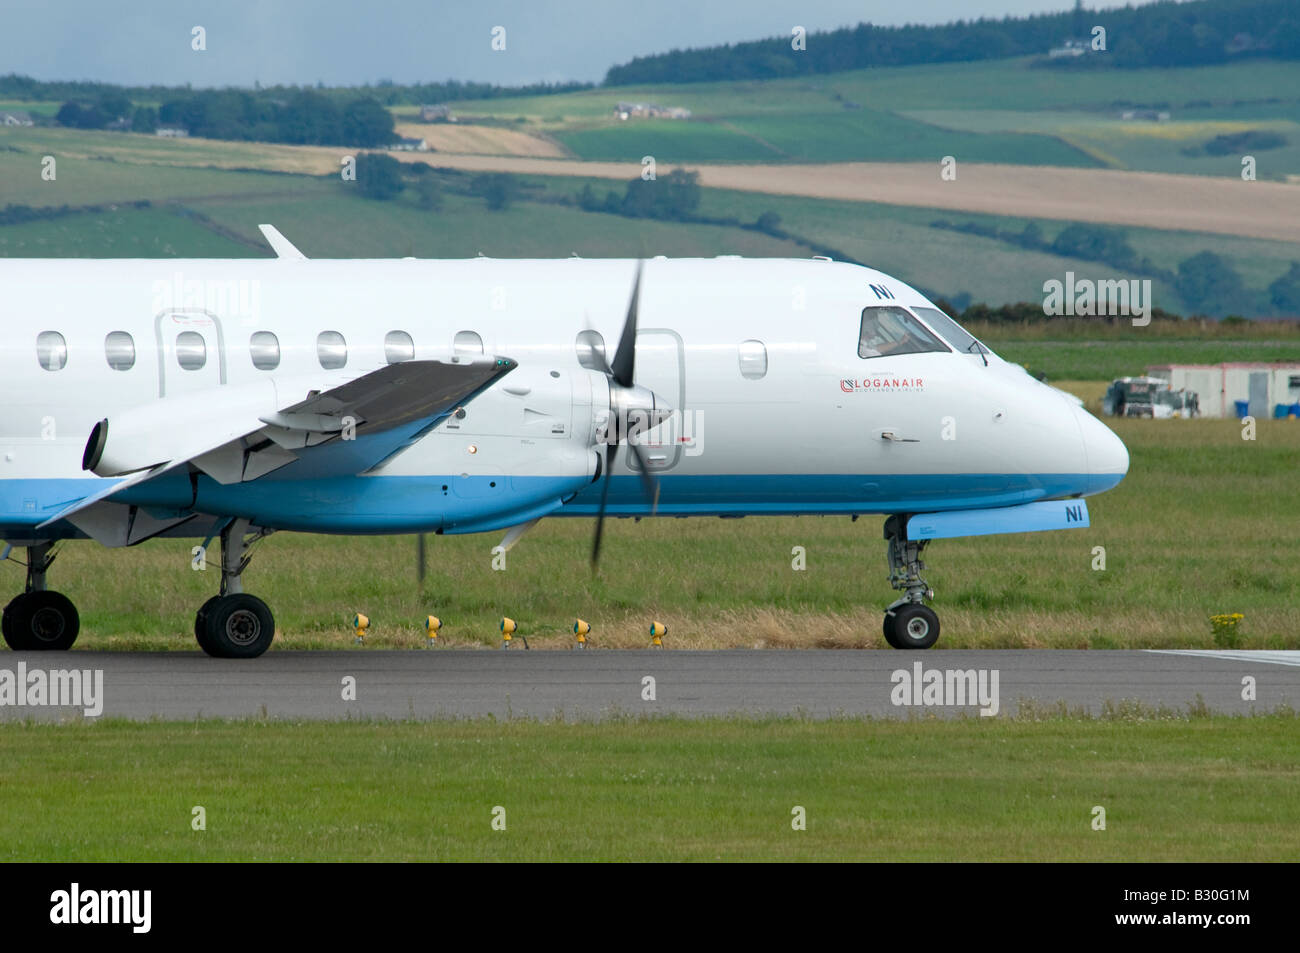 Saab SF 340B Turbo Prop Passenger Aircraft owned by Flybe operated by Loganair at Inverness Airport Stock Photo